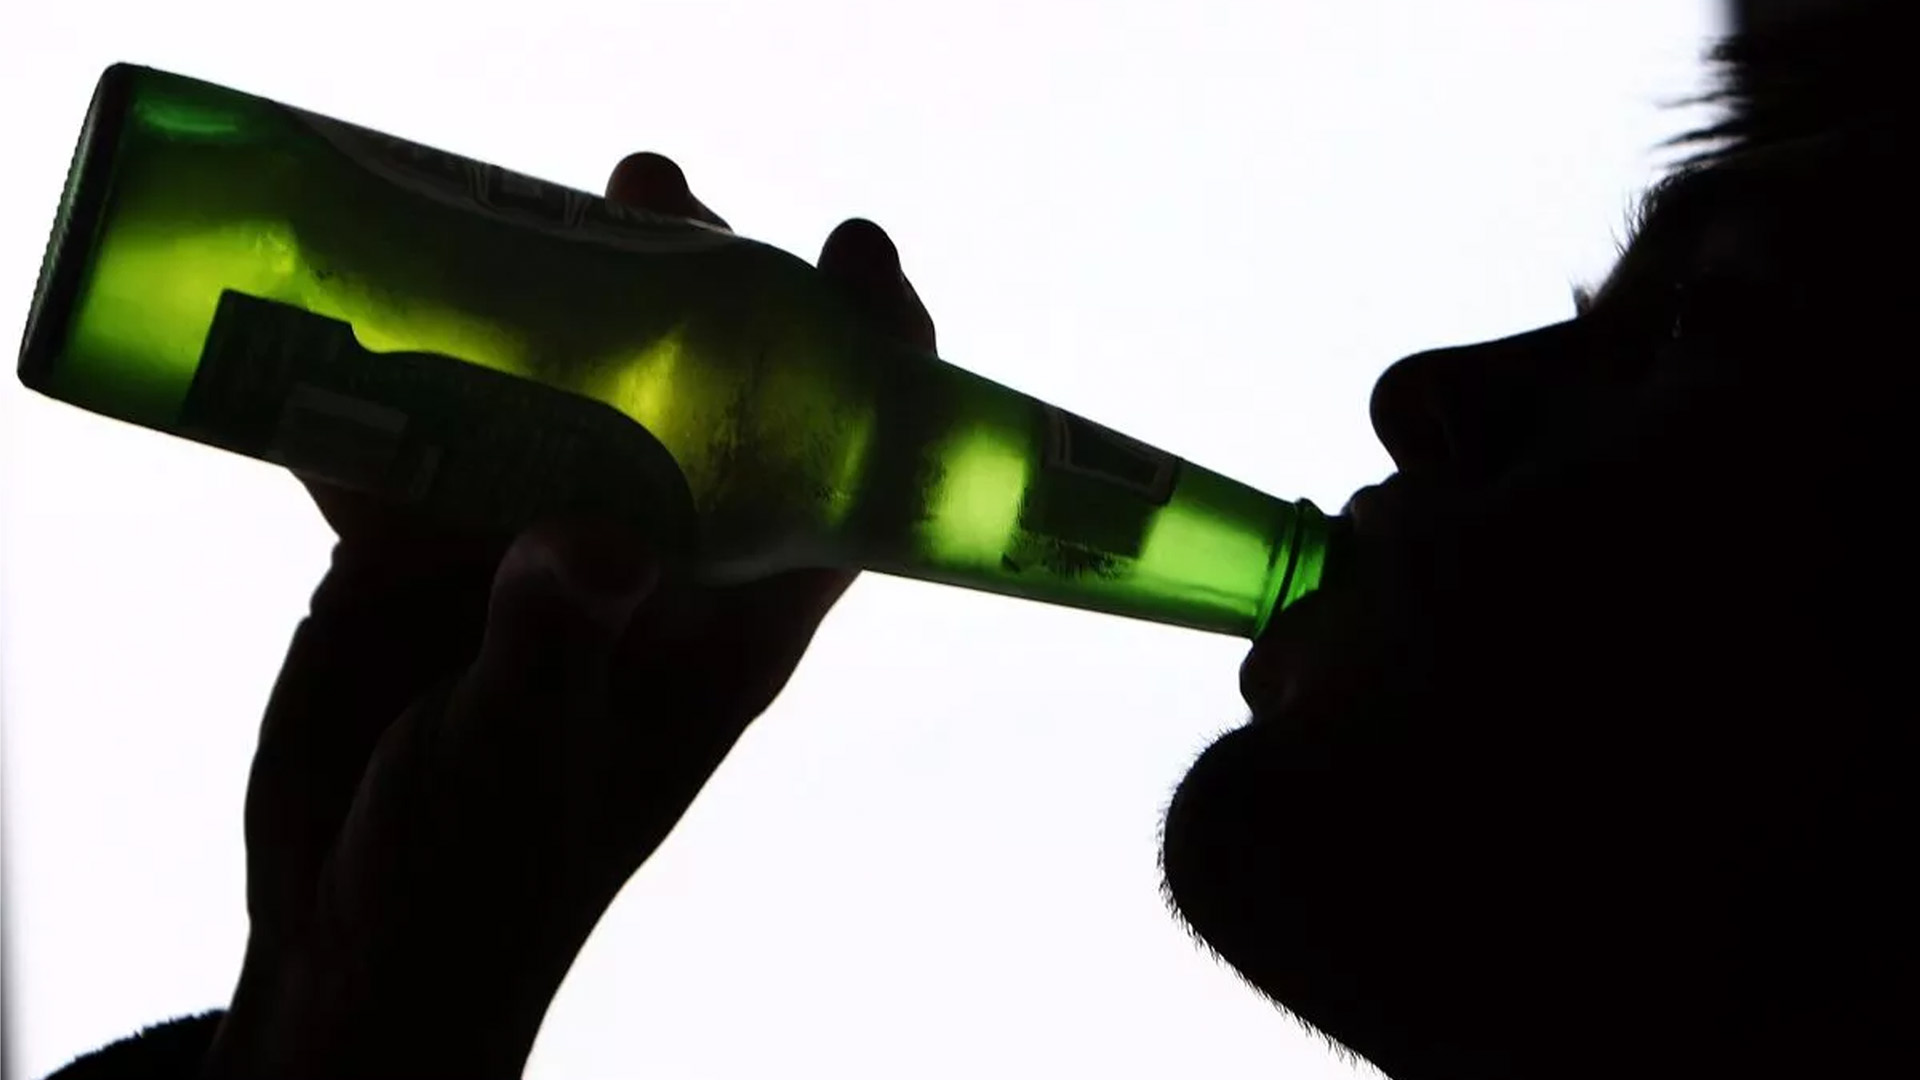 Underage Drinking in Malta Revealed in Latest WHO Report